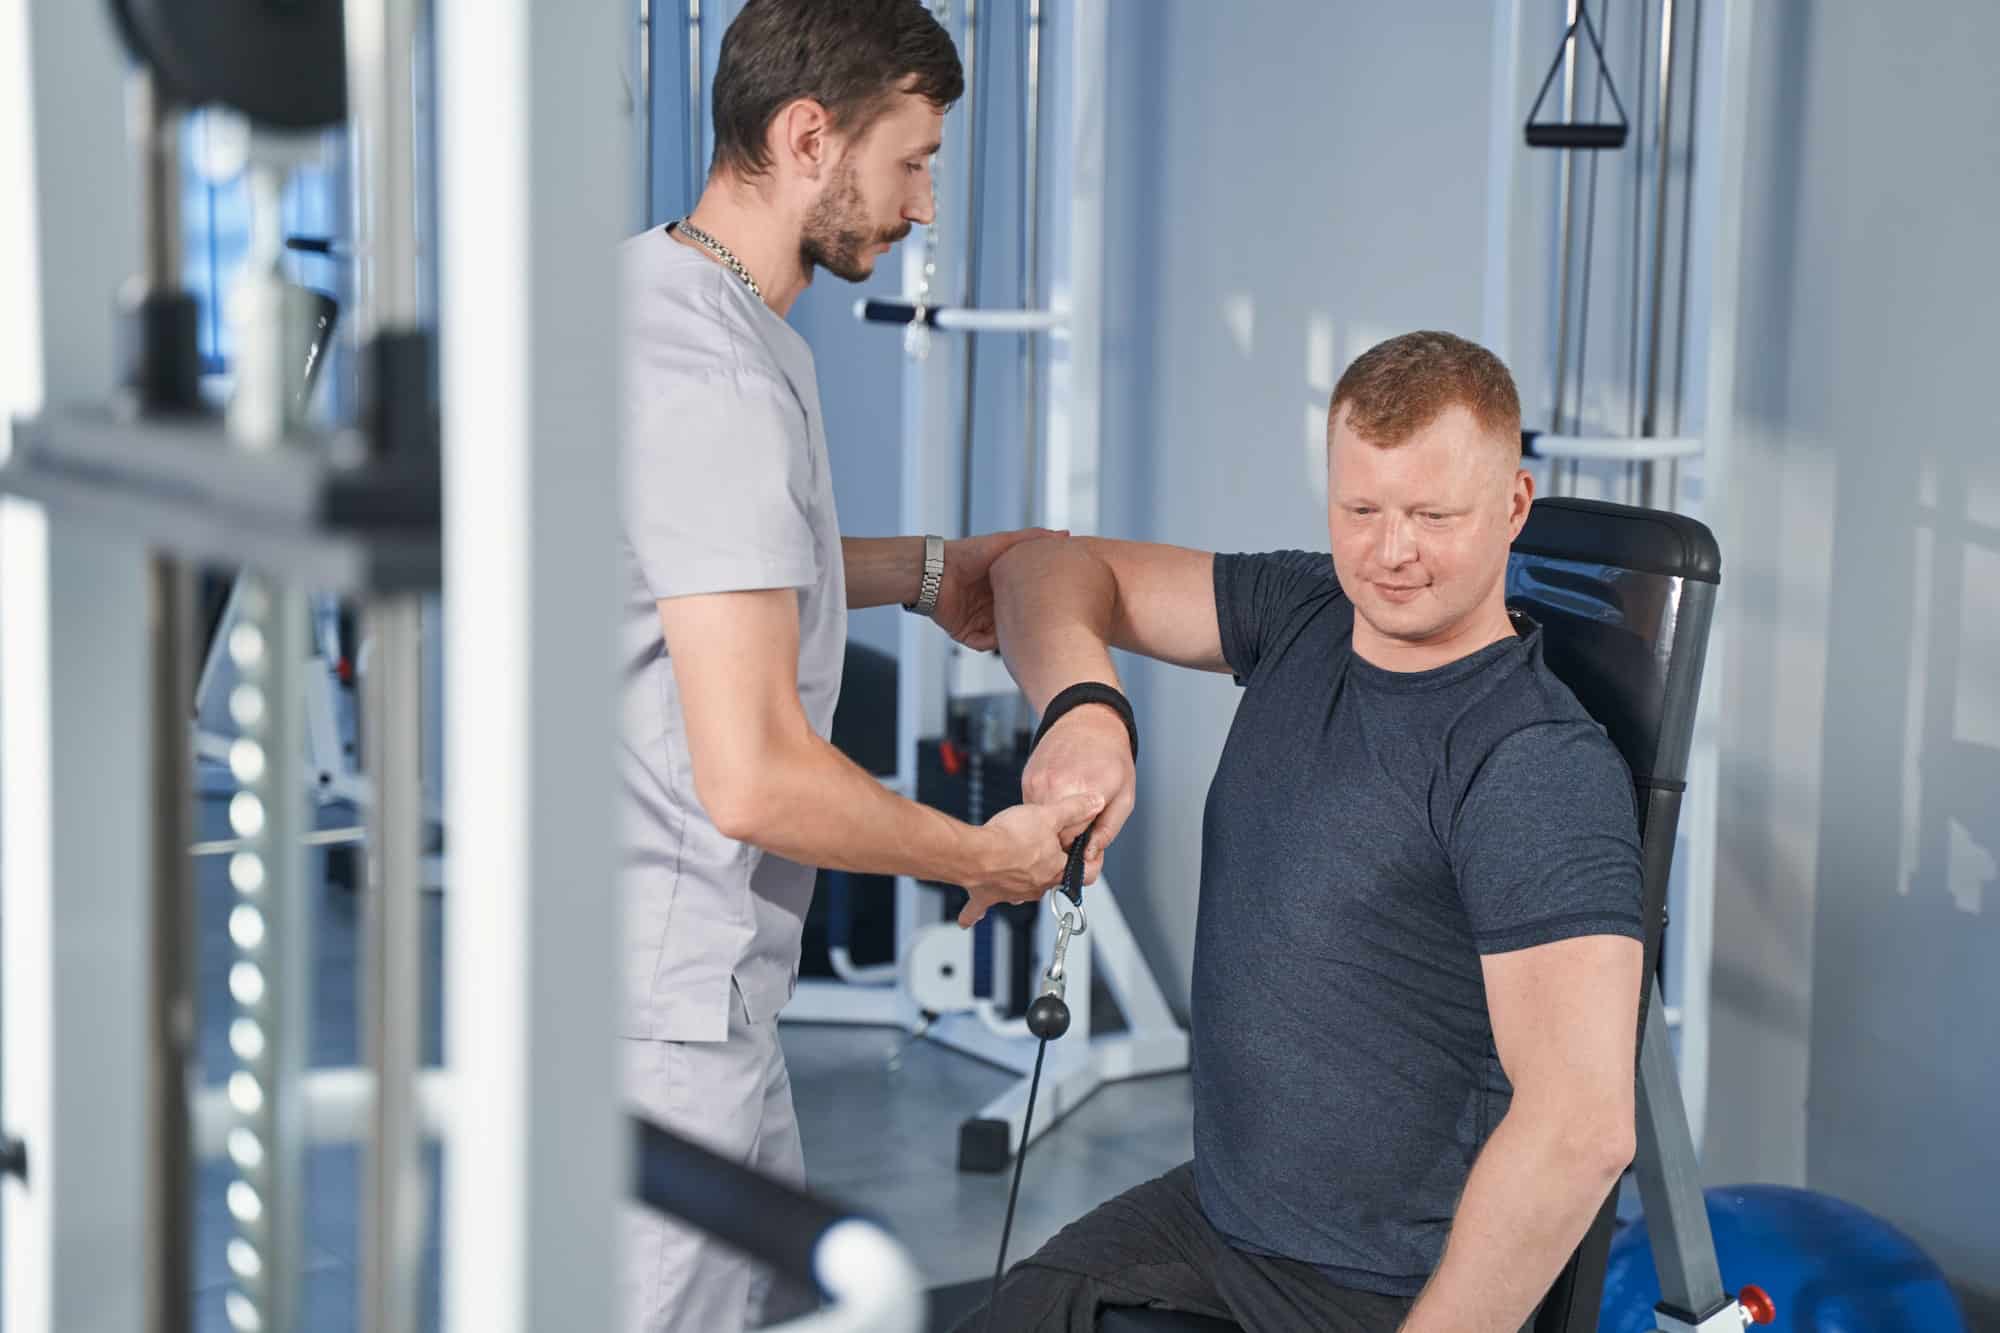 Physician helps man with disability lift arm on rehab weight simulator